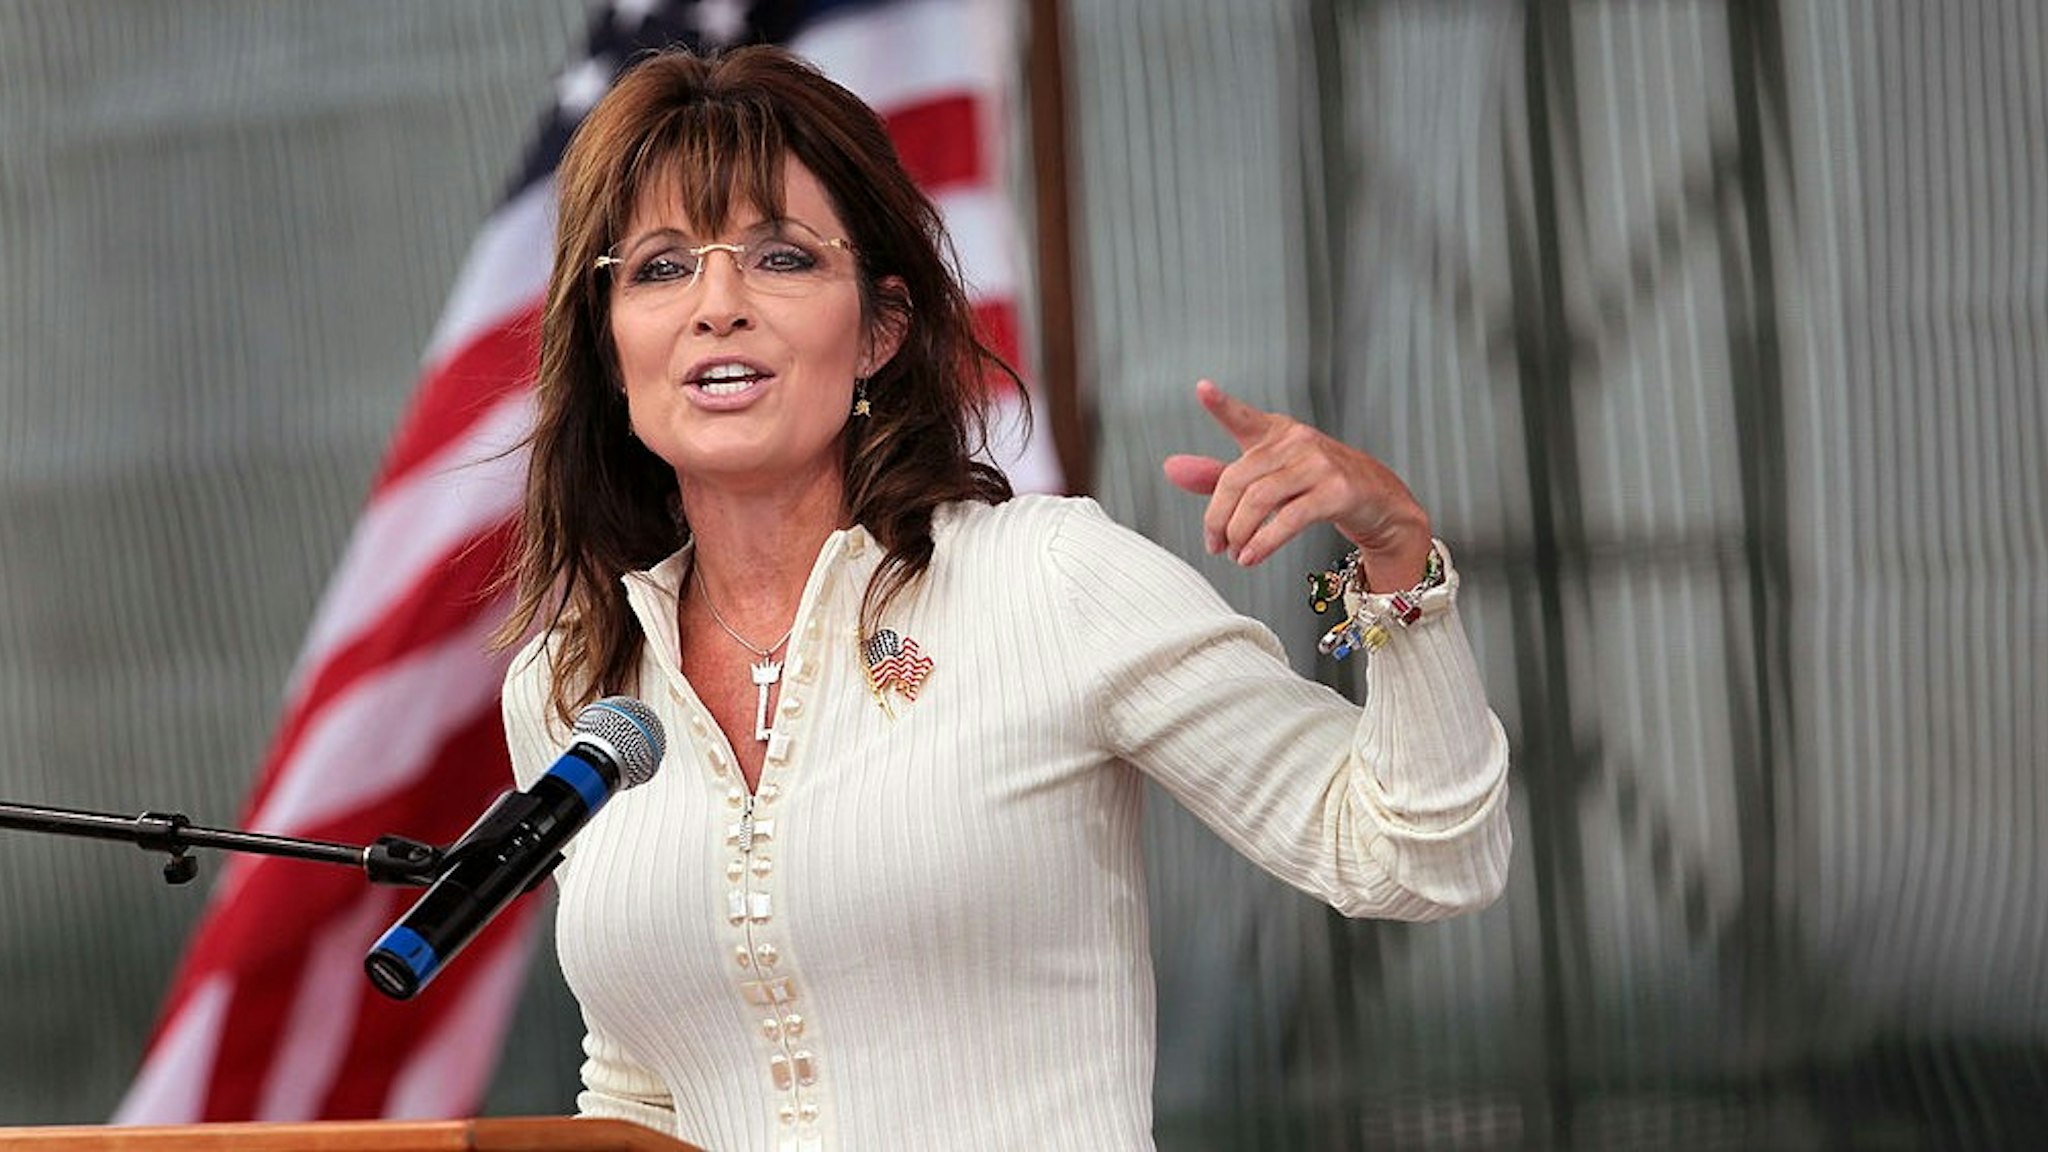 INDIANOLA, IA - SEPTEMBER 03: Former Alaska Governor Sarah Palin speaks to supporters during the Tea Party of America's "Restoring America" event at the Indianola Balloon Festival Grounds September 3, 2011 in Indianola, Iowa. Yesterday Palin attended a Conservatives4Palin event. She is scheduled to speak at another Tea Party event in New Hampshire on Monday. The stops continue to fuel speculation that the former governor will run for president, a decision which she said she would make by the end of September. (Photo by